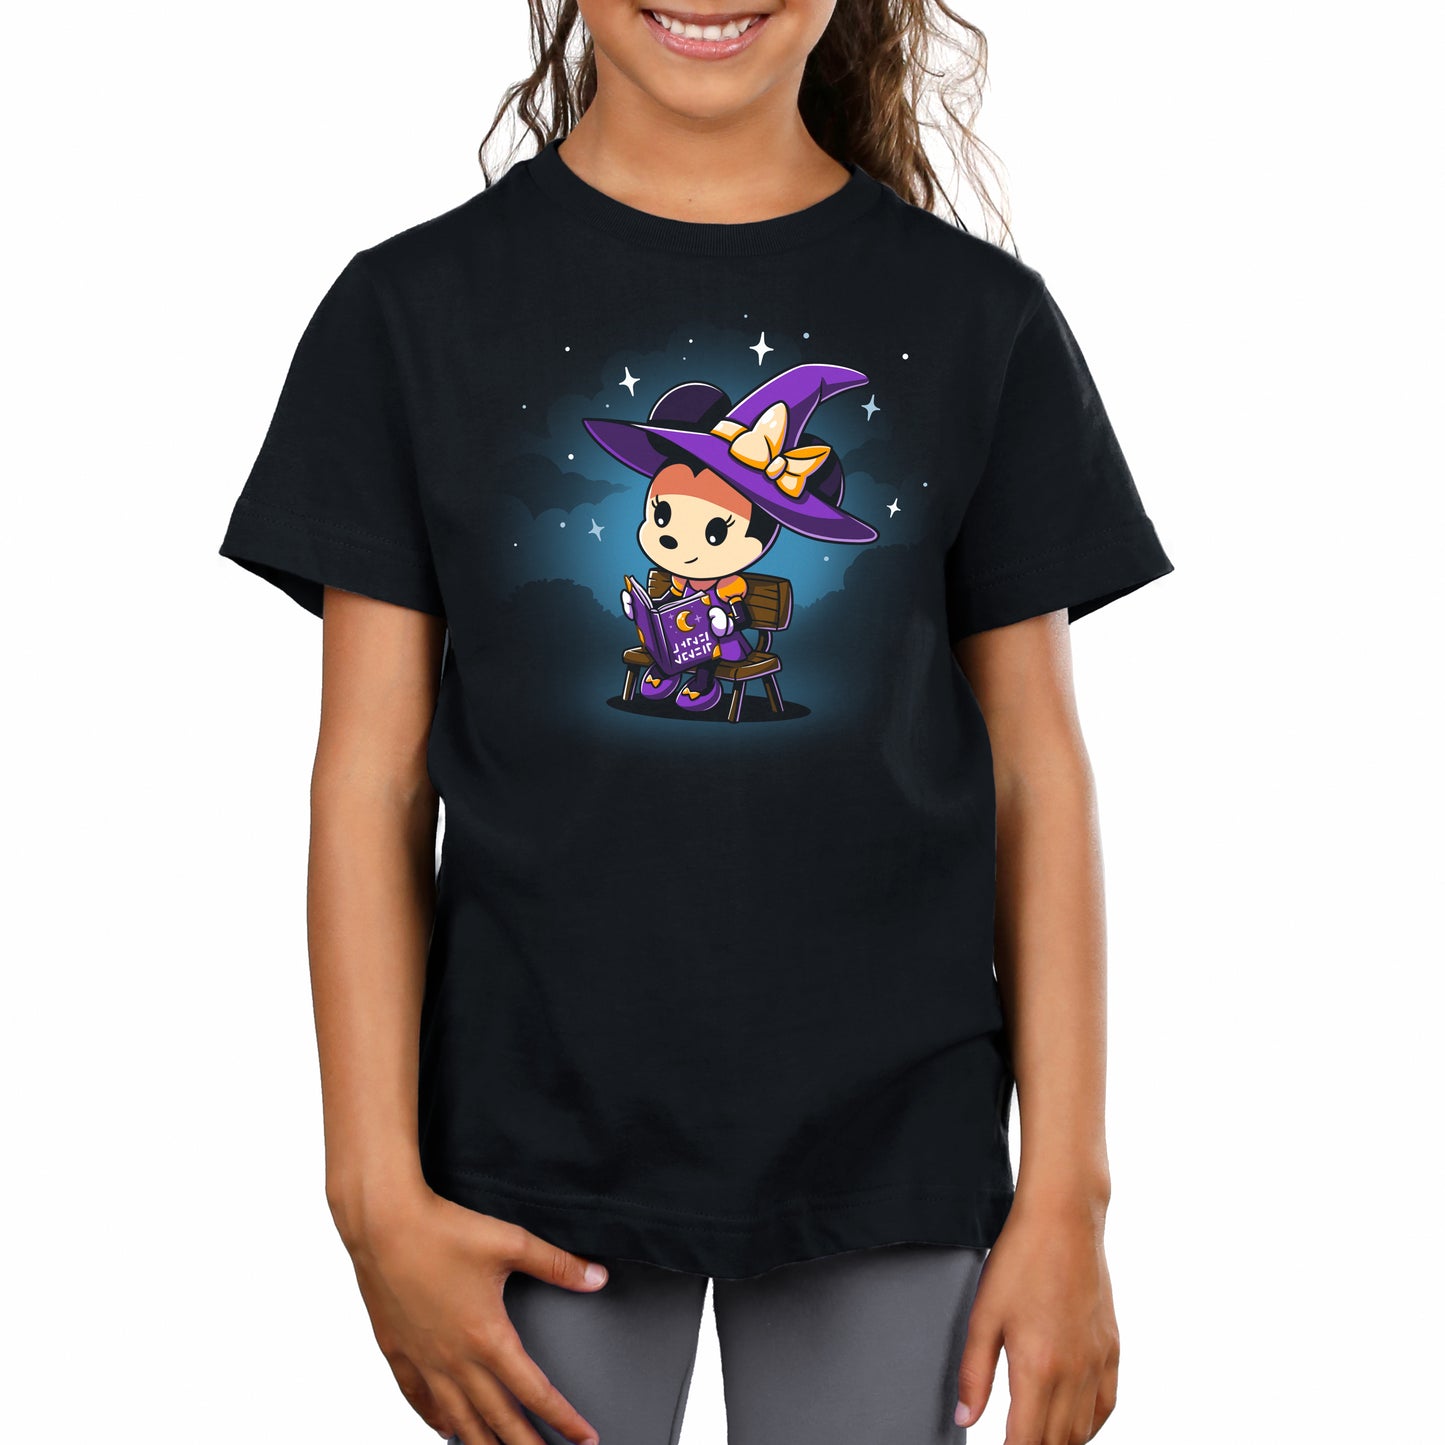 A girl wearing a black T-shirt with a Minnie's Spellbook design from Disney.